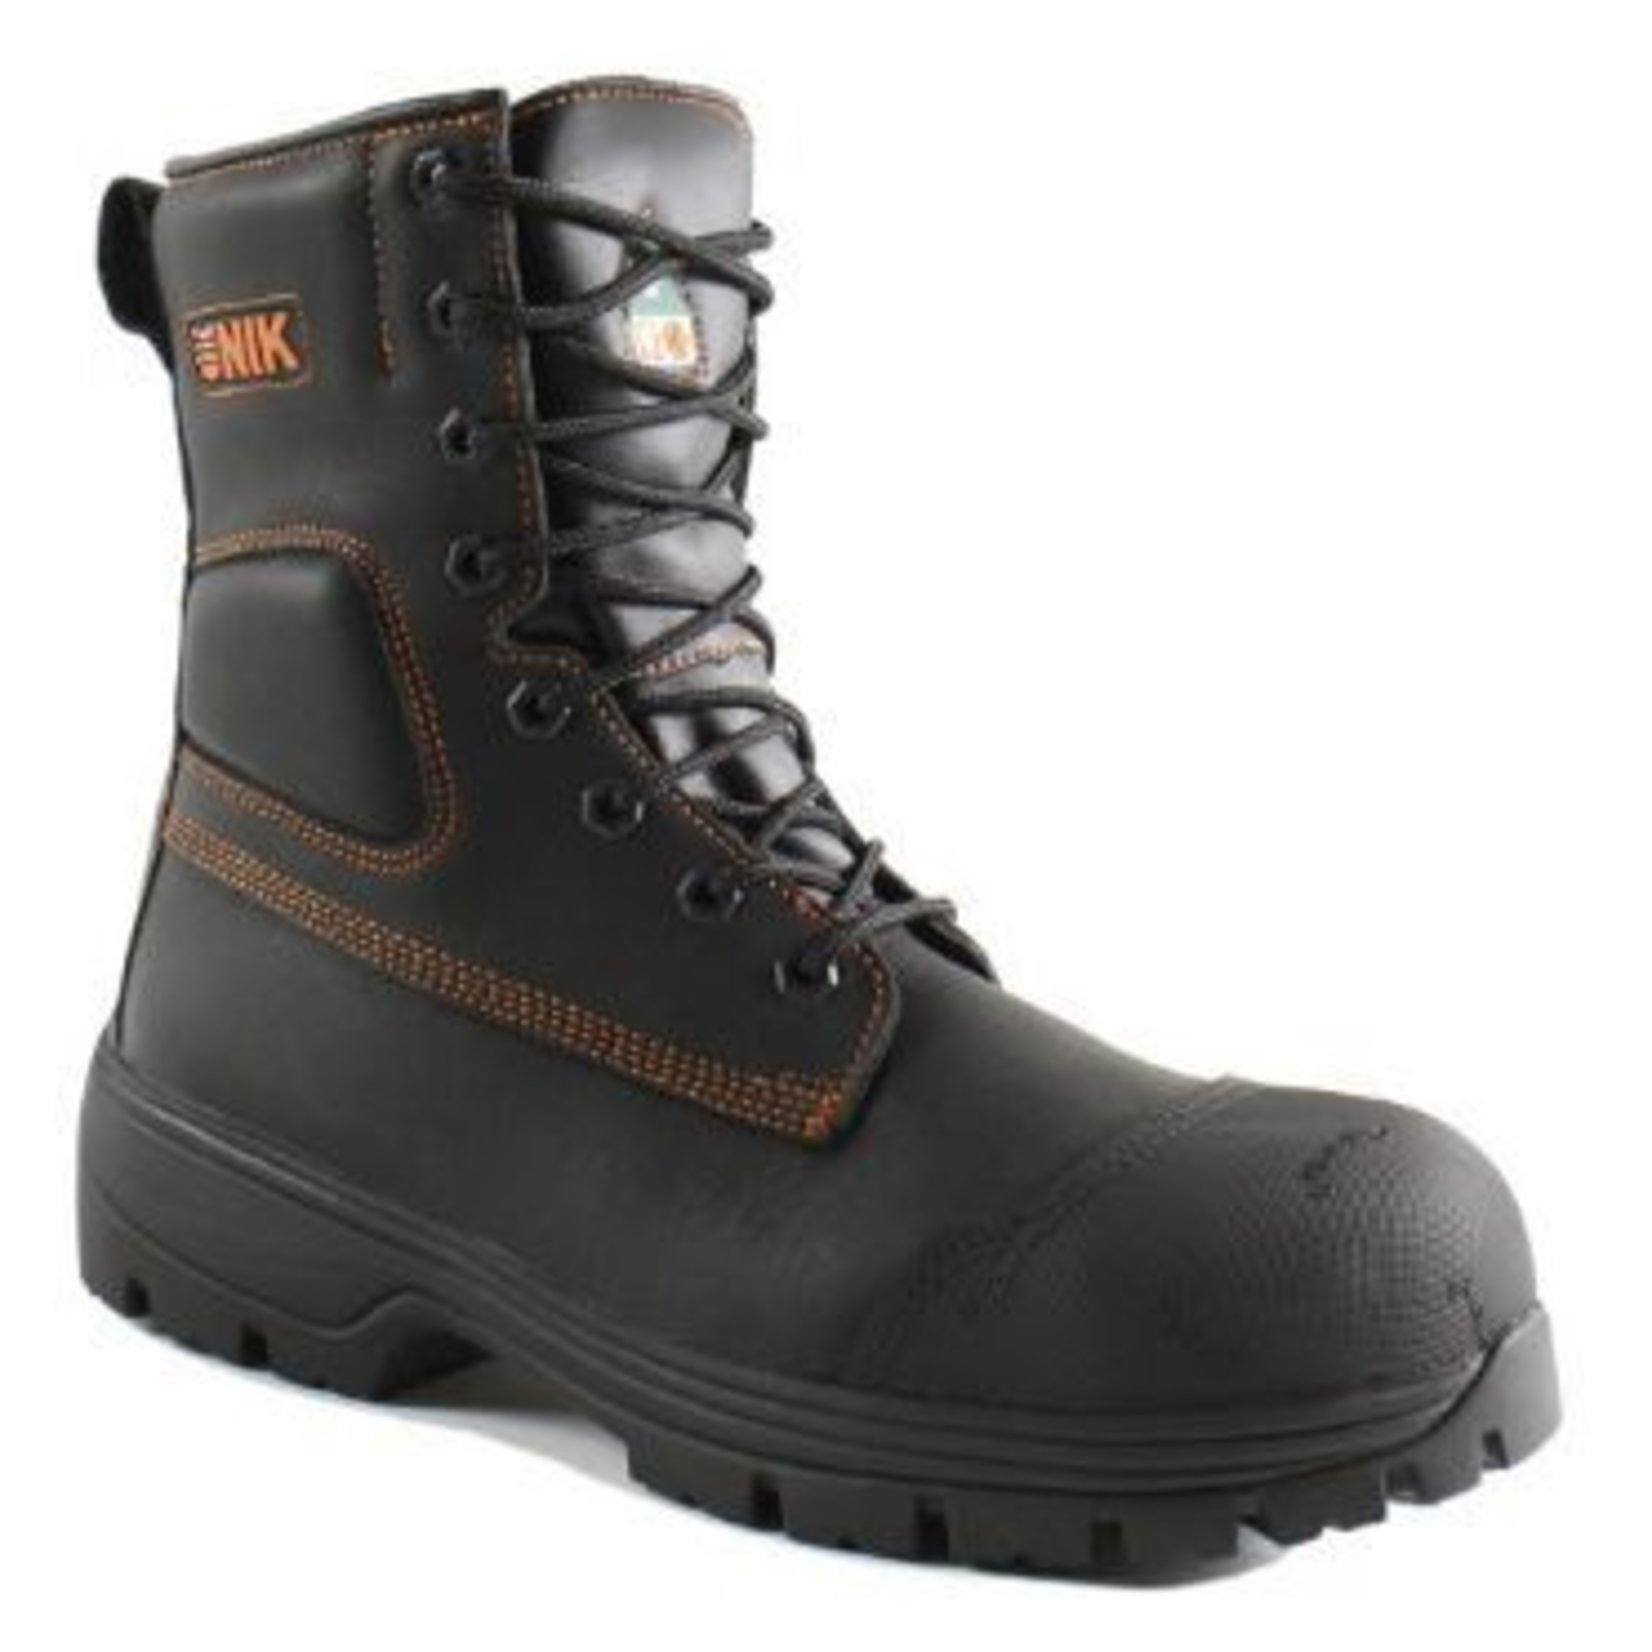 UNIK UNIK 8"Contractor Leather Safety Work Boot USF89401